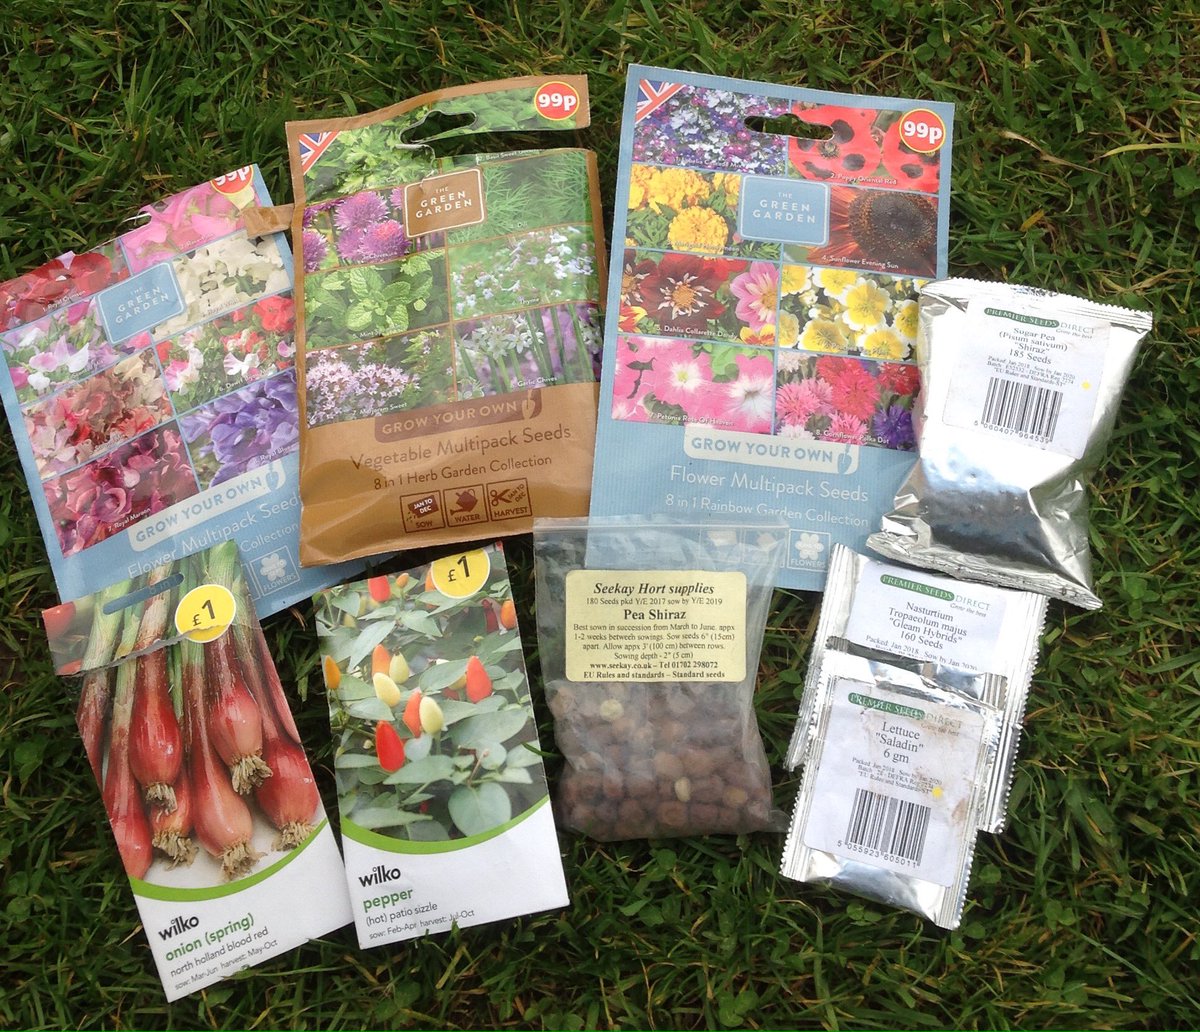 You will need seeds. I recommend lettuce, peas, beans, sunflowers and herbs to start with, or whatever else you can get your hands on. I get most of my seeds from eBay or supermarkets or swap with other growers. Ask your neighbours. Gardening is all about swapping. 7/11